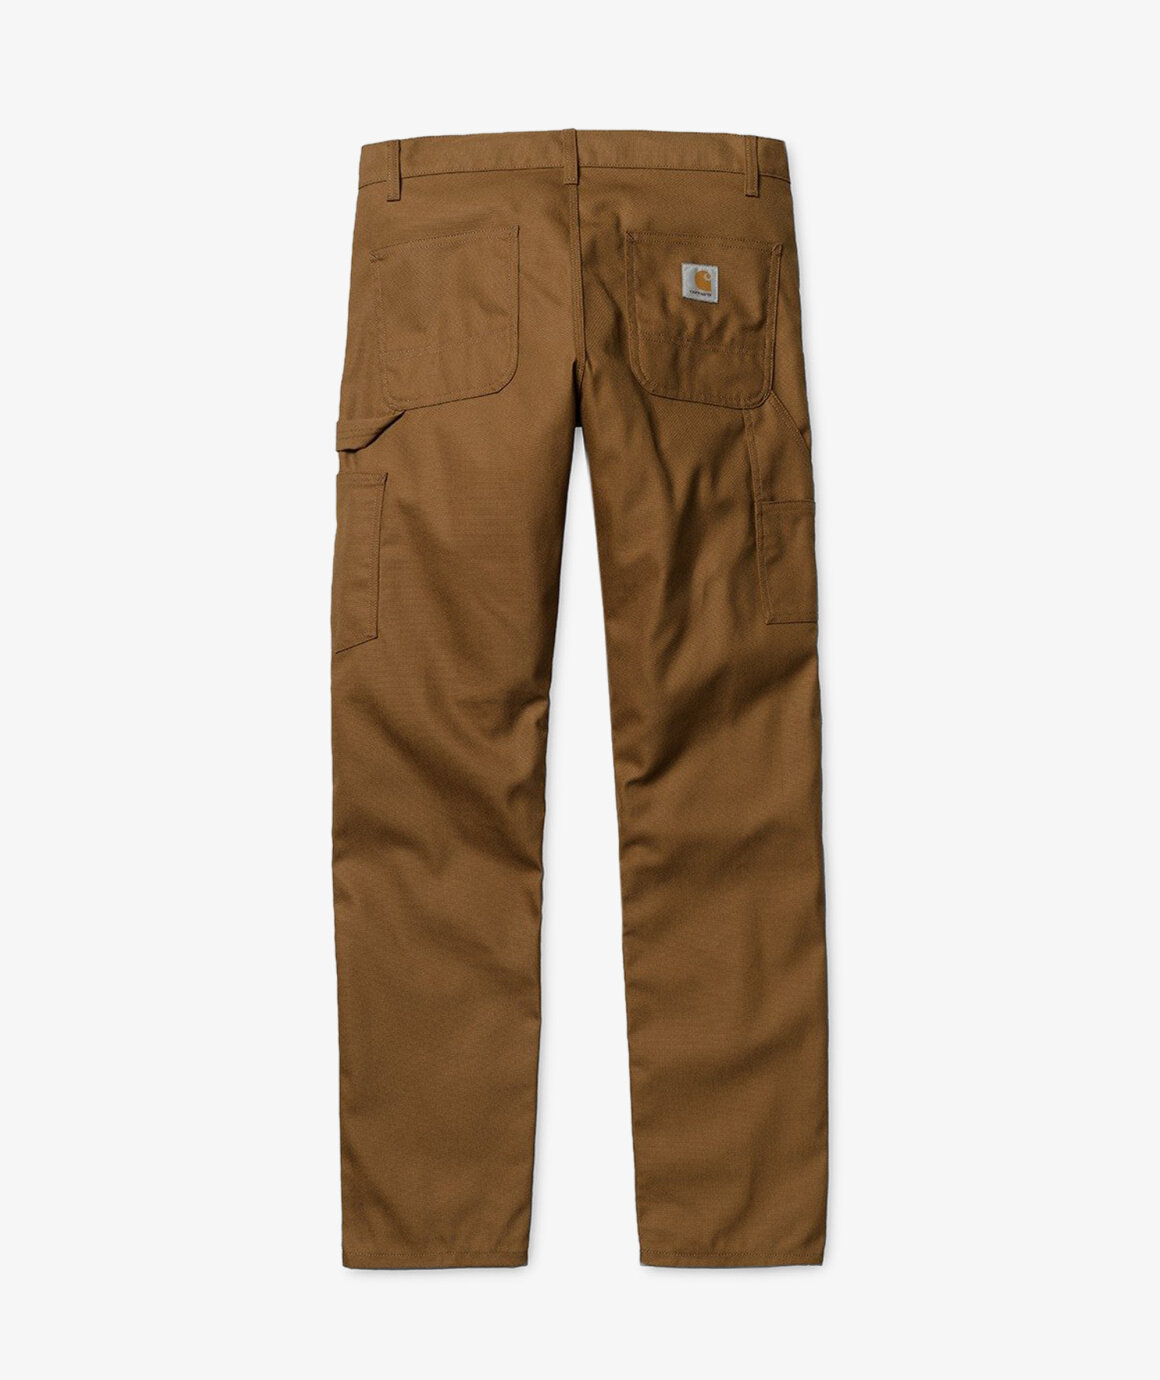 Norse Store | Shipping Worldwide - Carhartt Ruck Double Knee